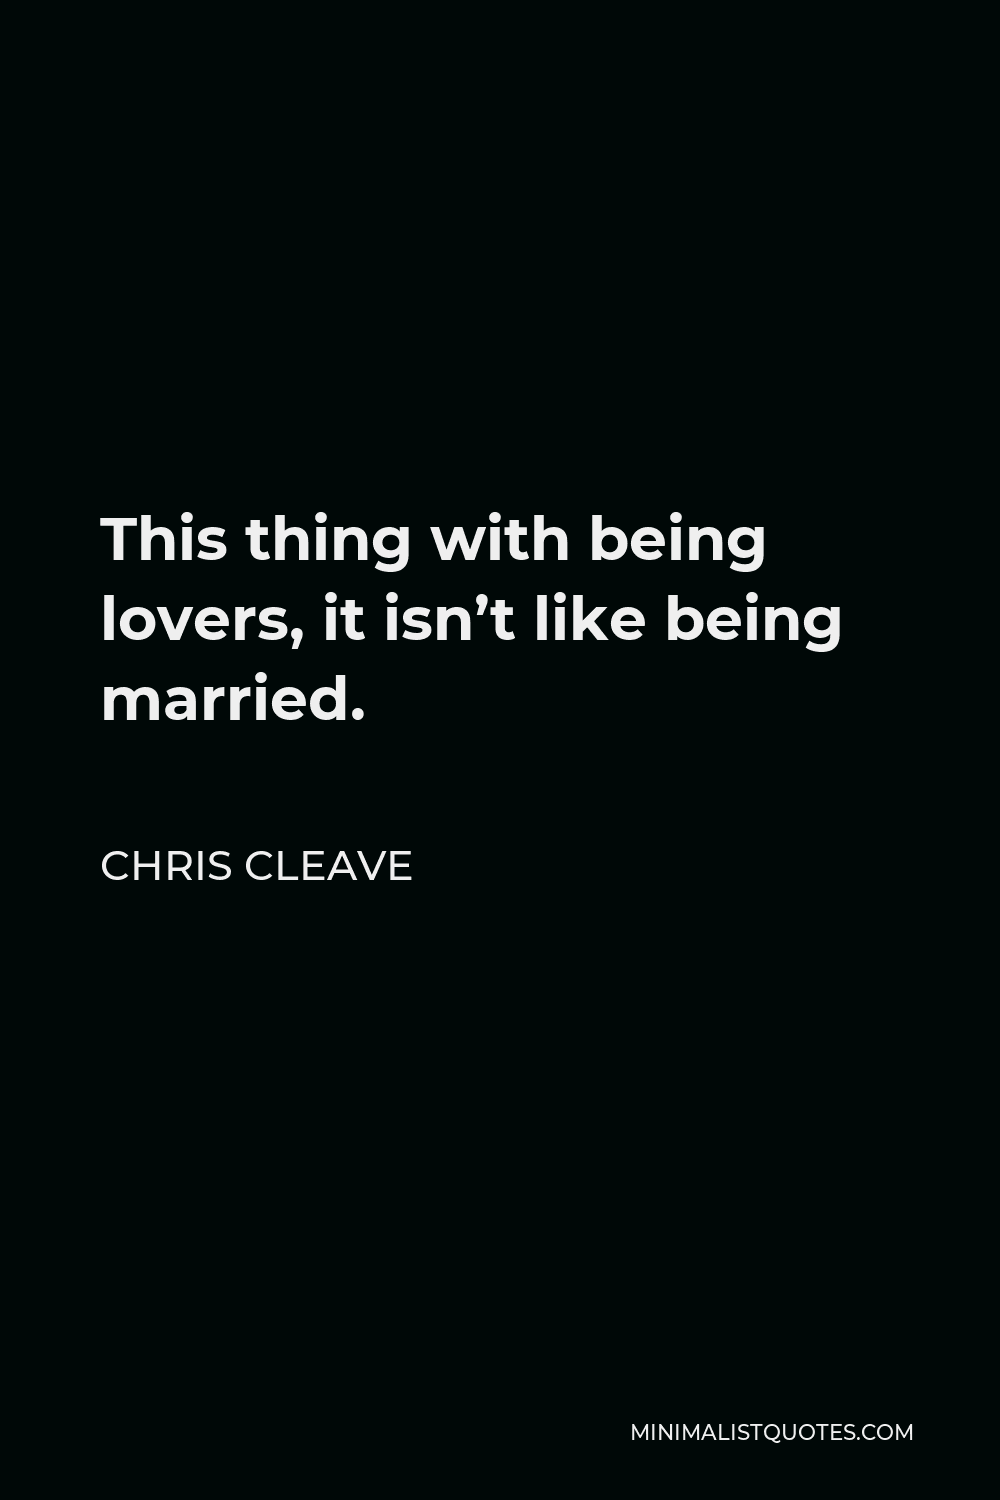 Chris Cleave Quote - This thing with being lovers, it isn’t like being married.